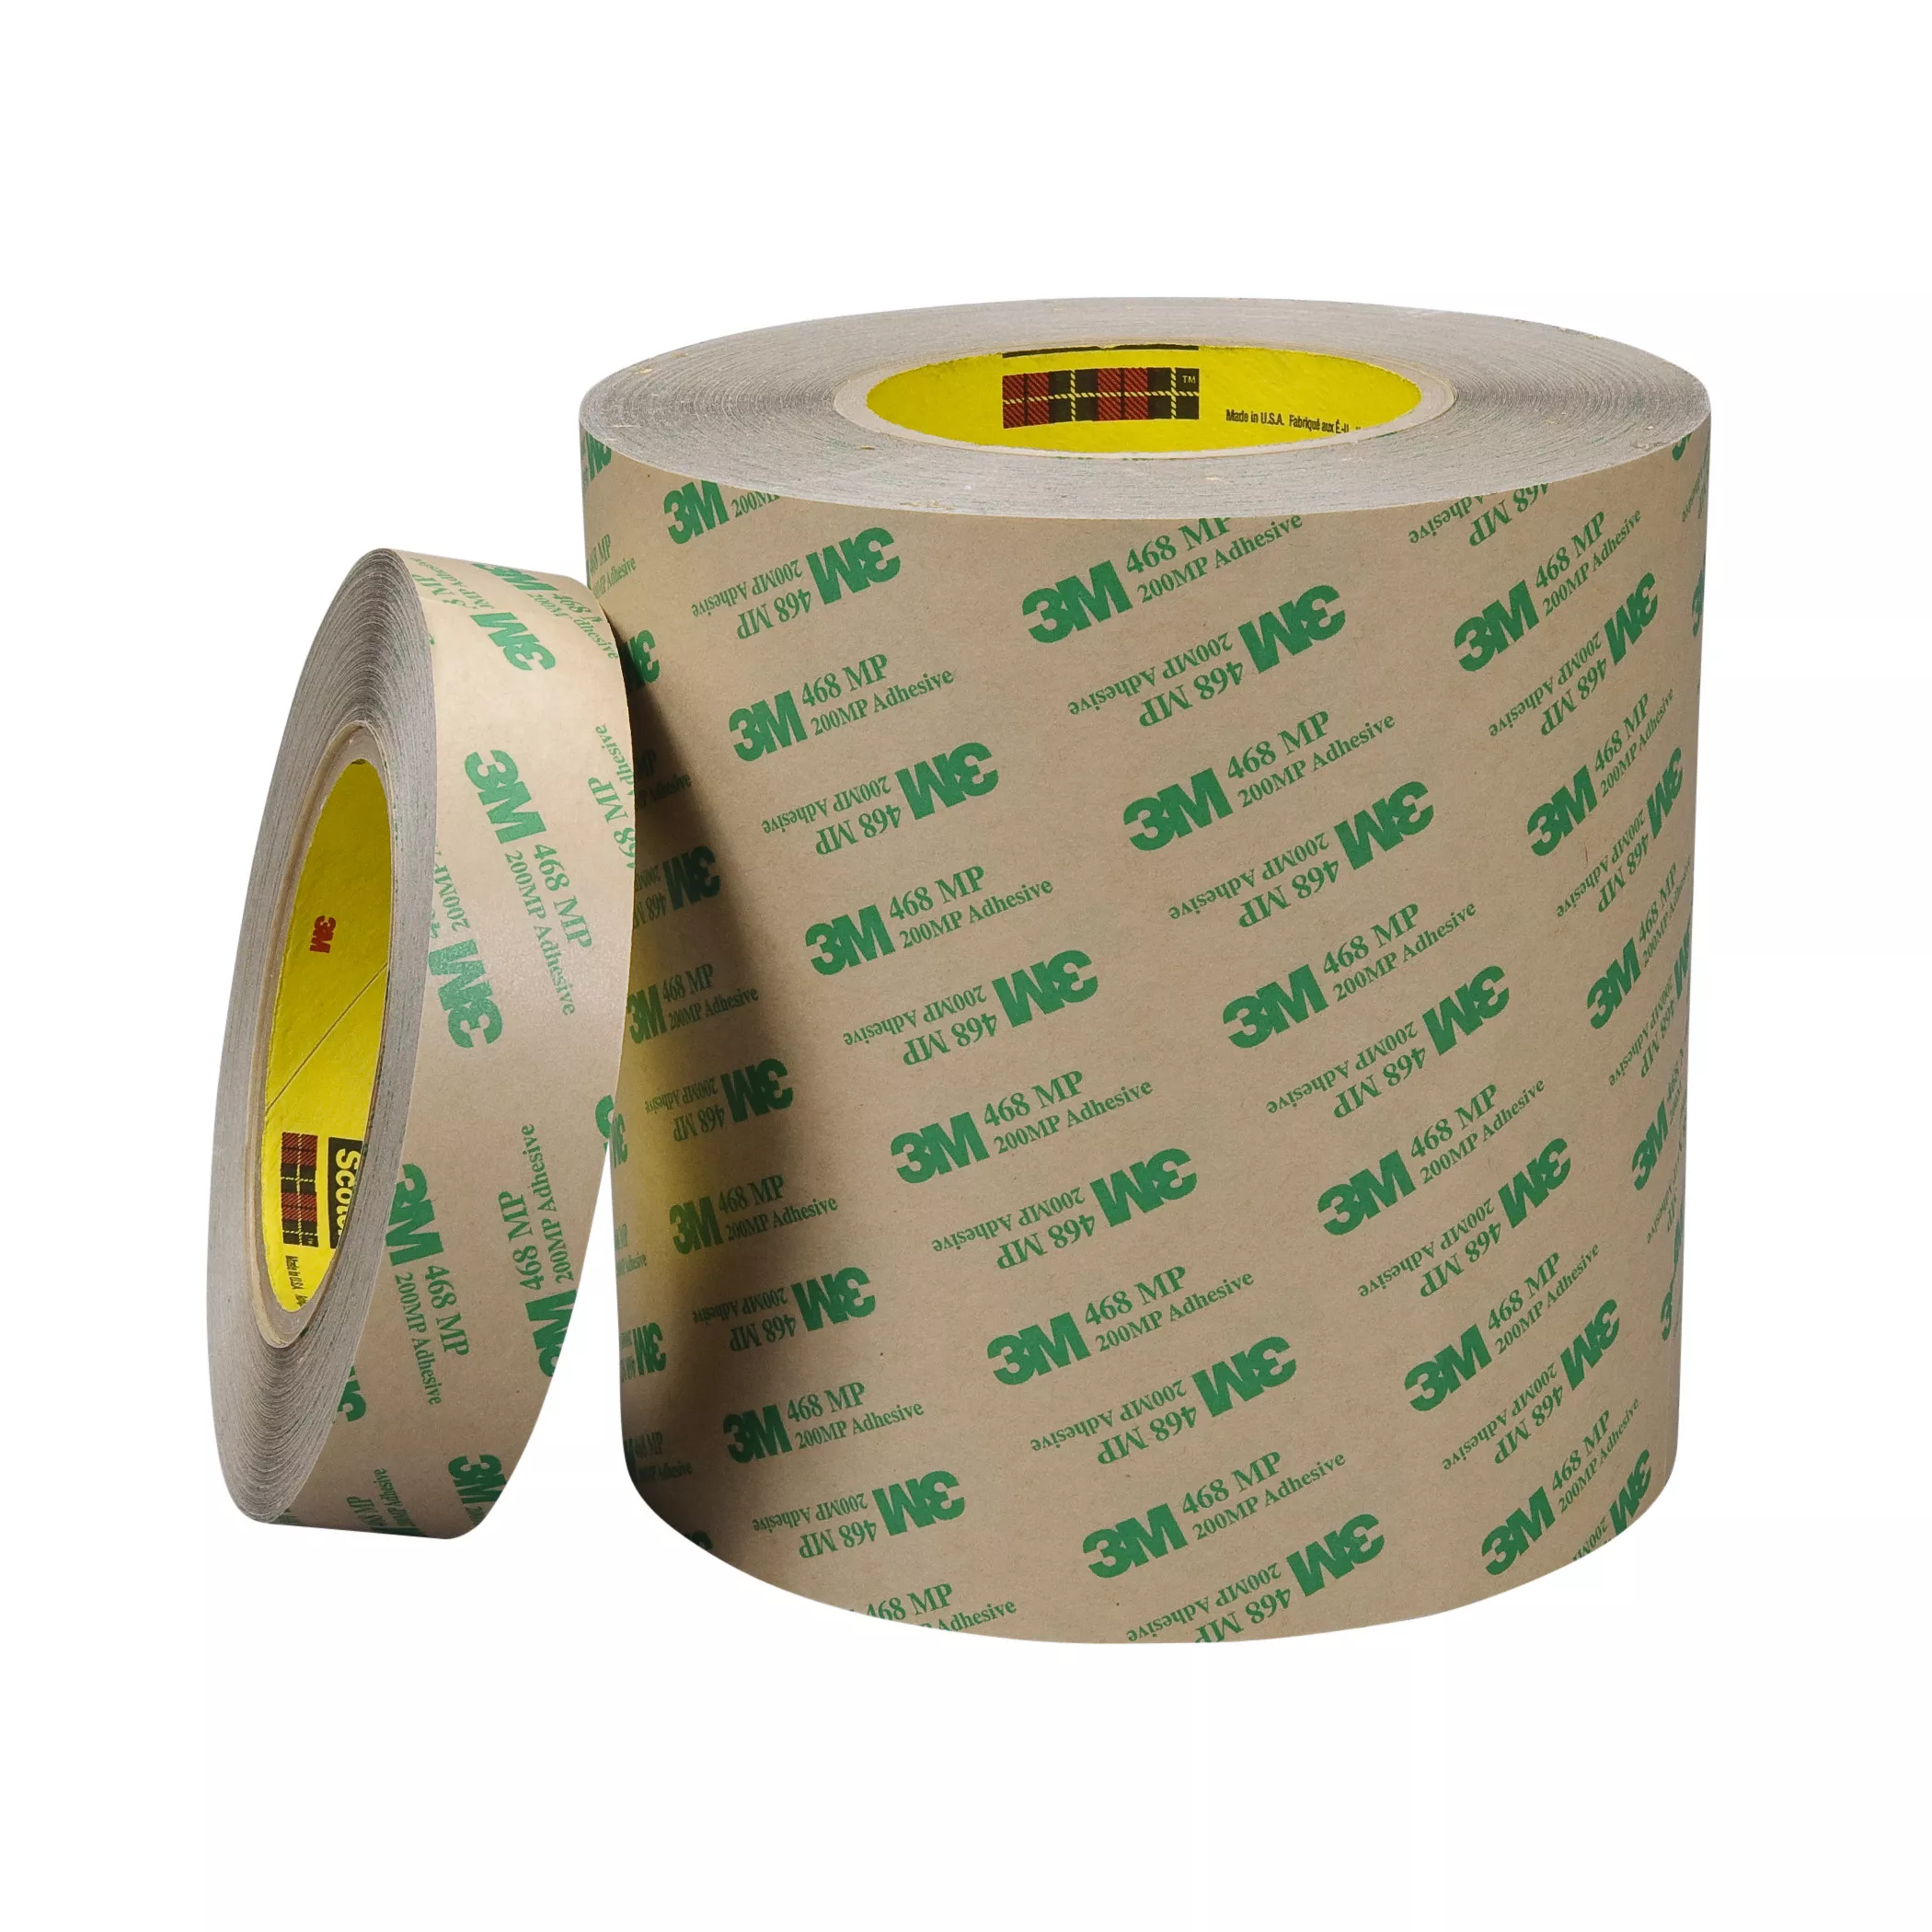 3M™ Adhesive Transfer Tape 468MP, Clear, 48 in x 120 yd, 5 mil, 1 roll
per case